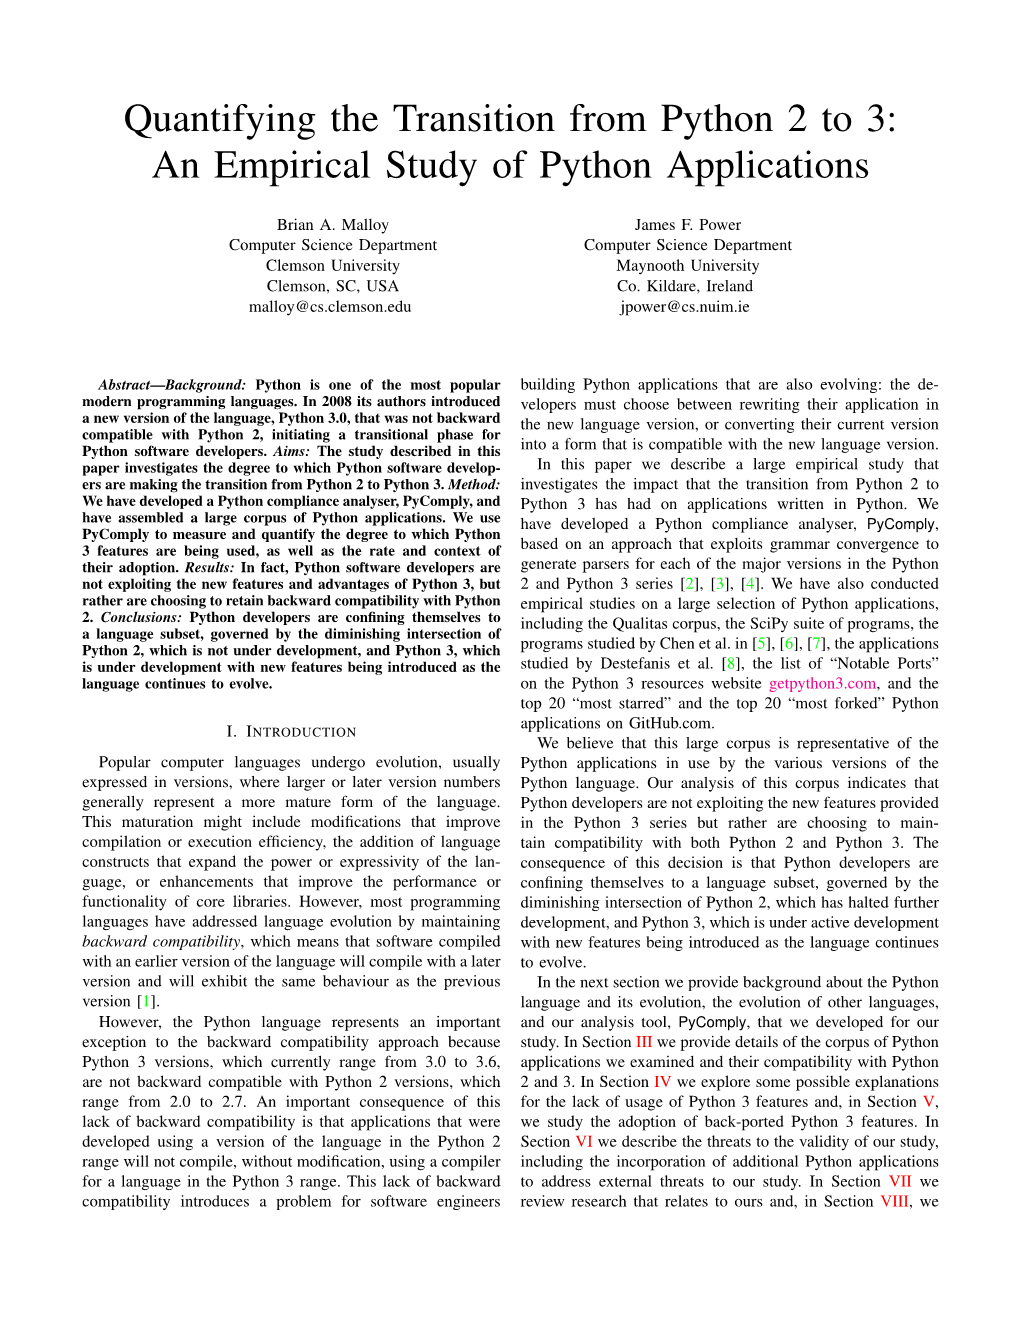 Quantifying the Transition from Python 2 to 3: an Empirical Study of Python Applications